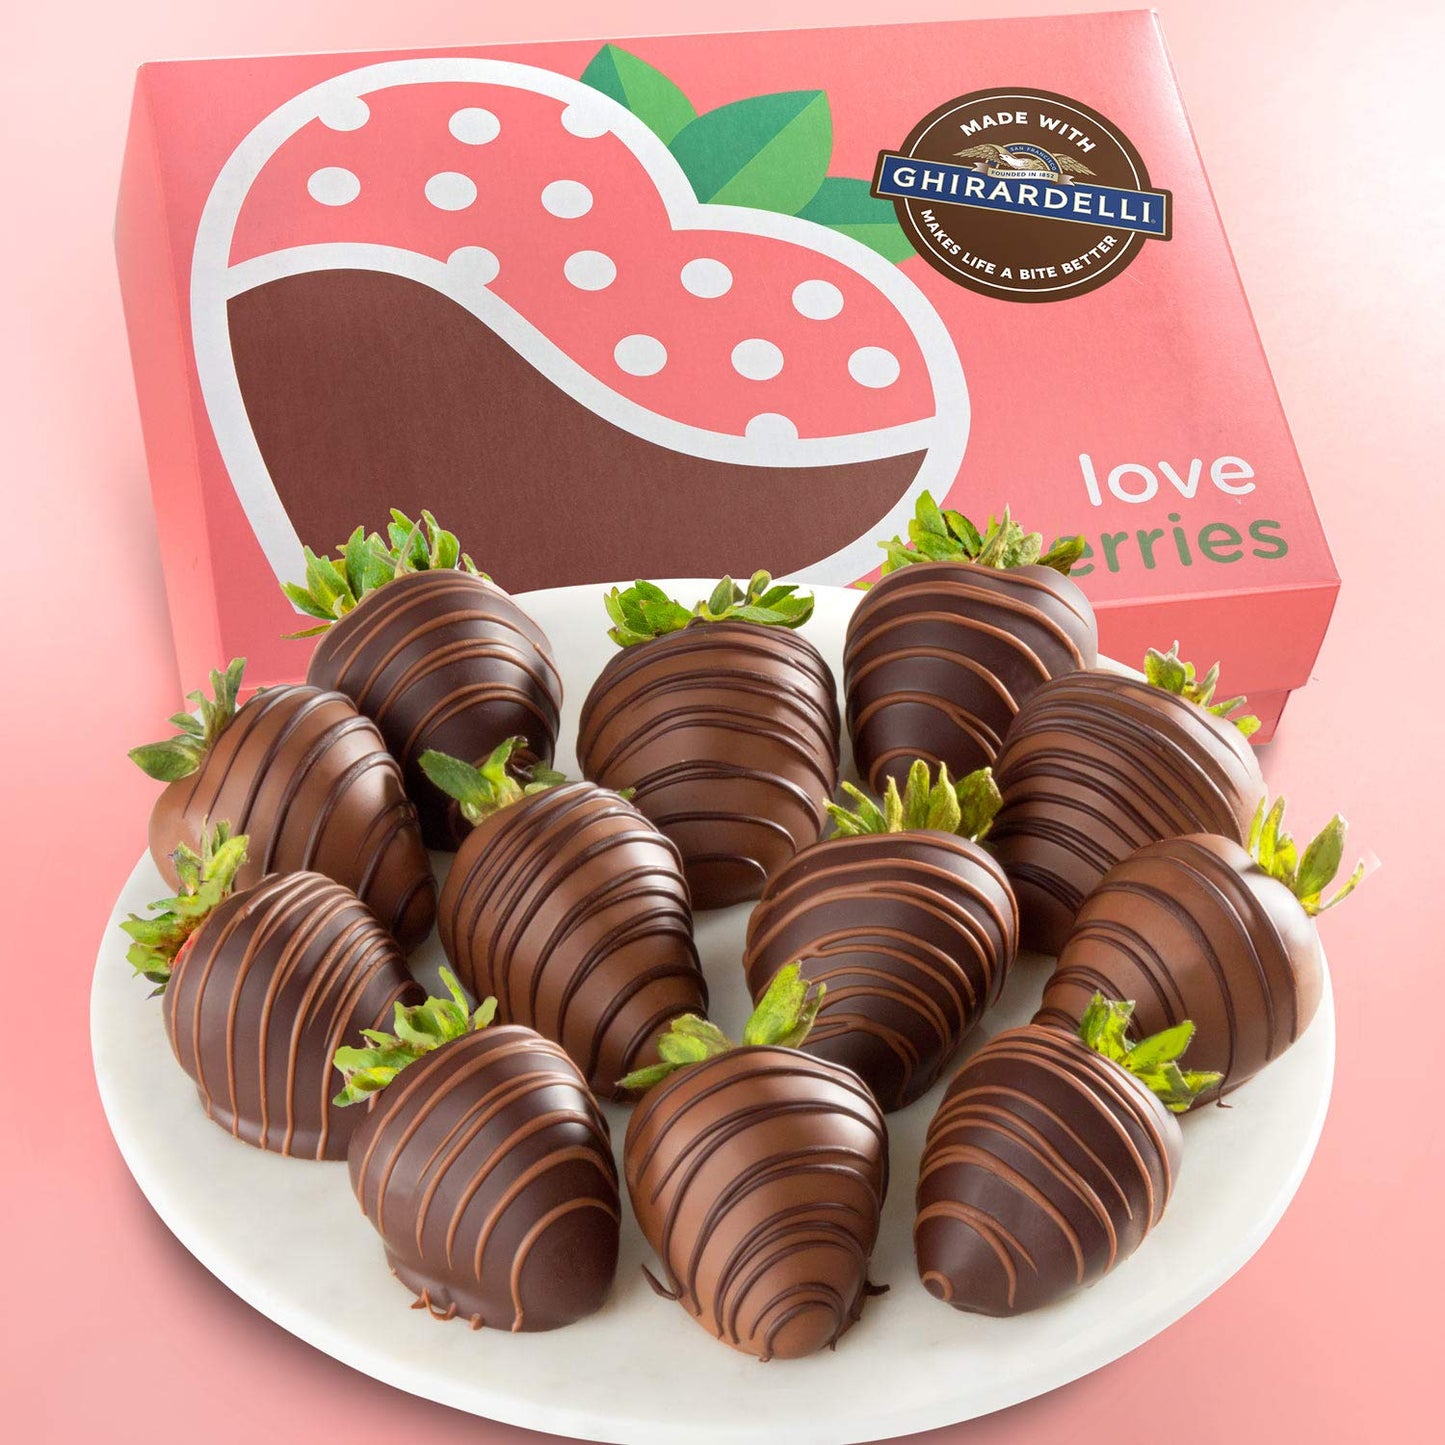 Golden State Fruit Made With Ghirardelli Chocolate Covered Strawberries, 12Count